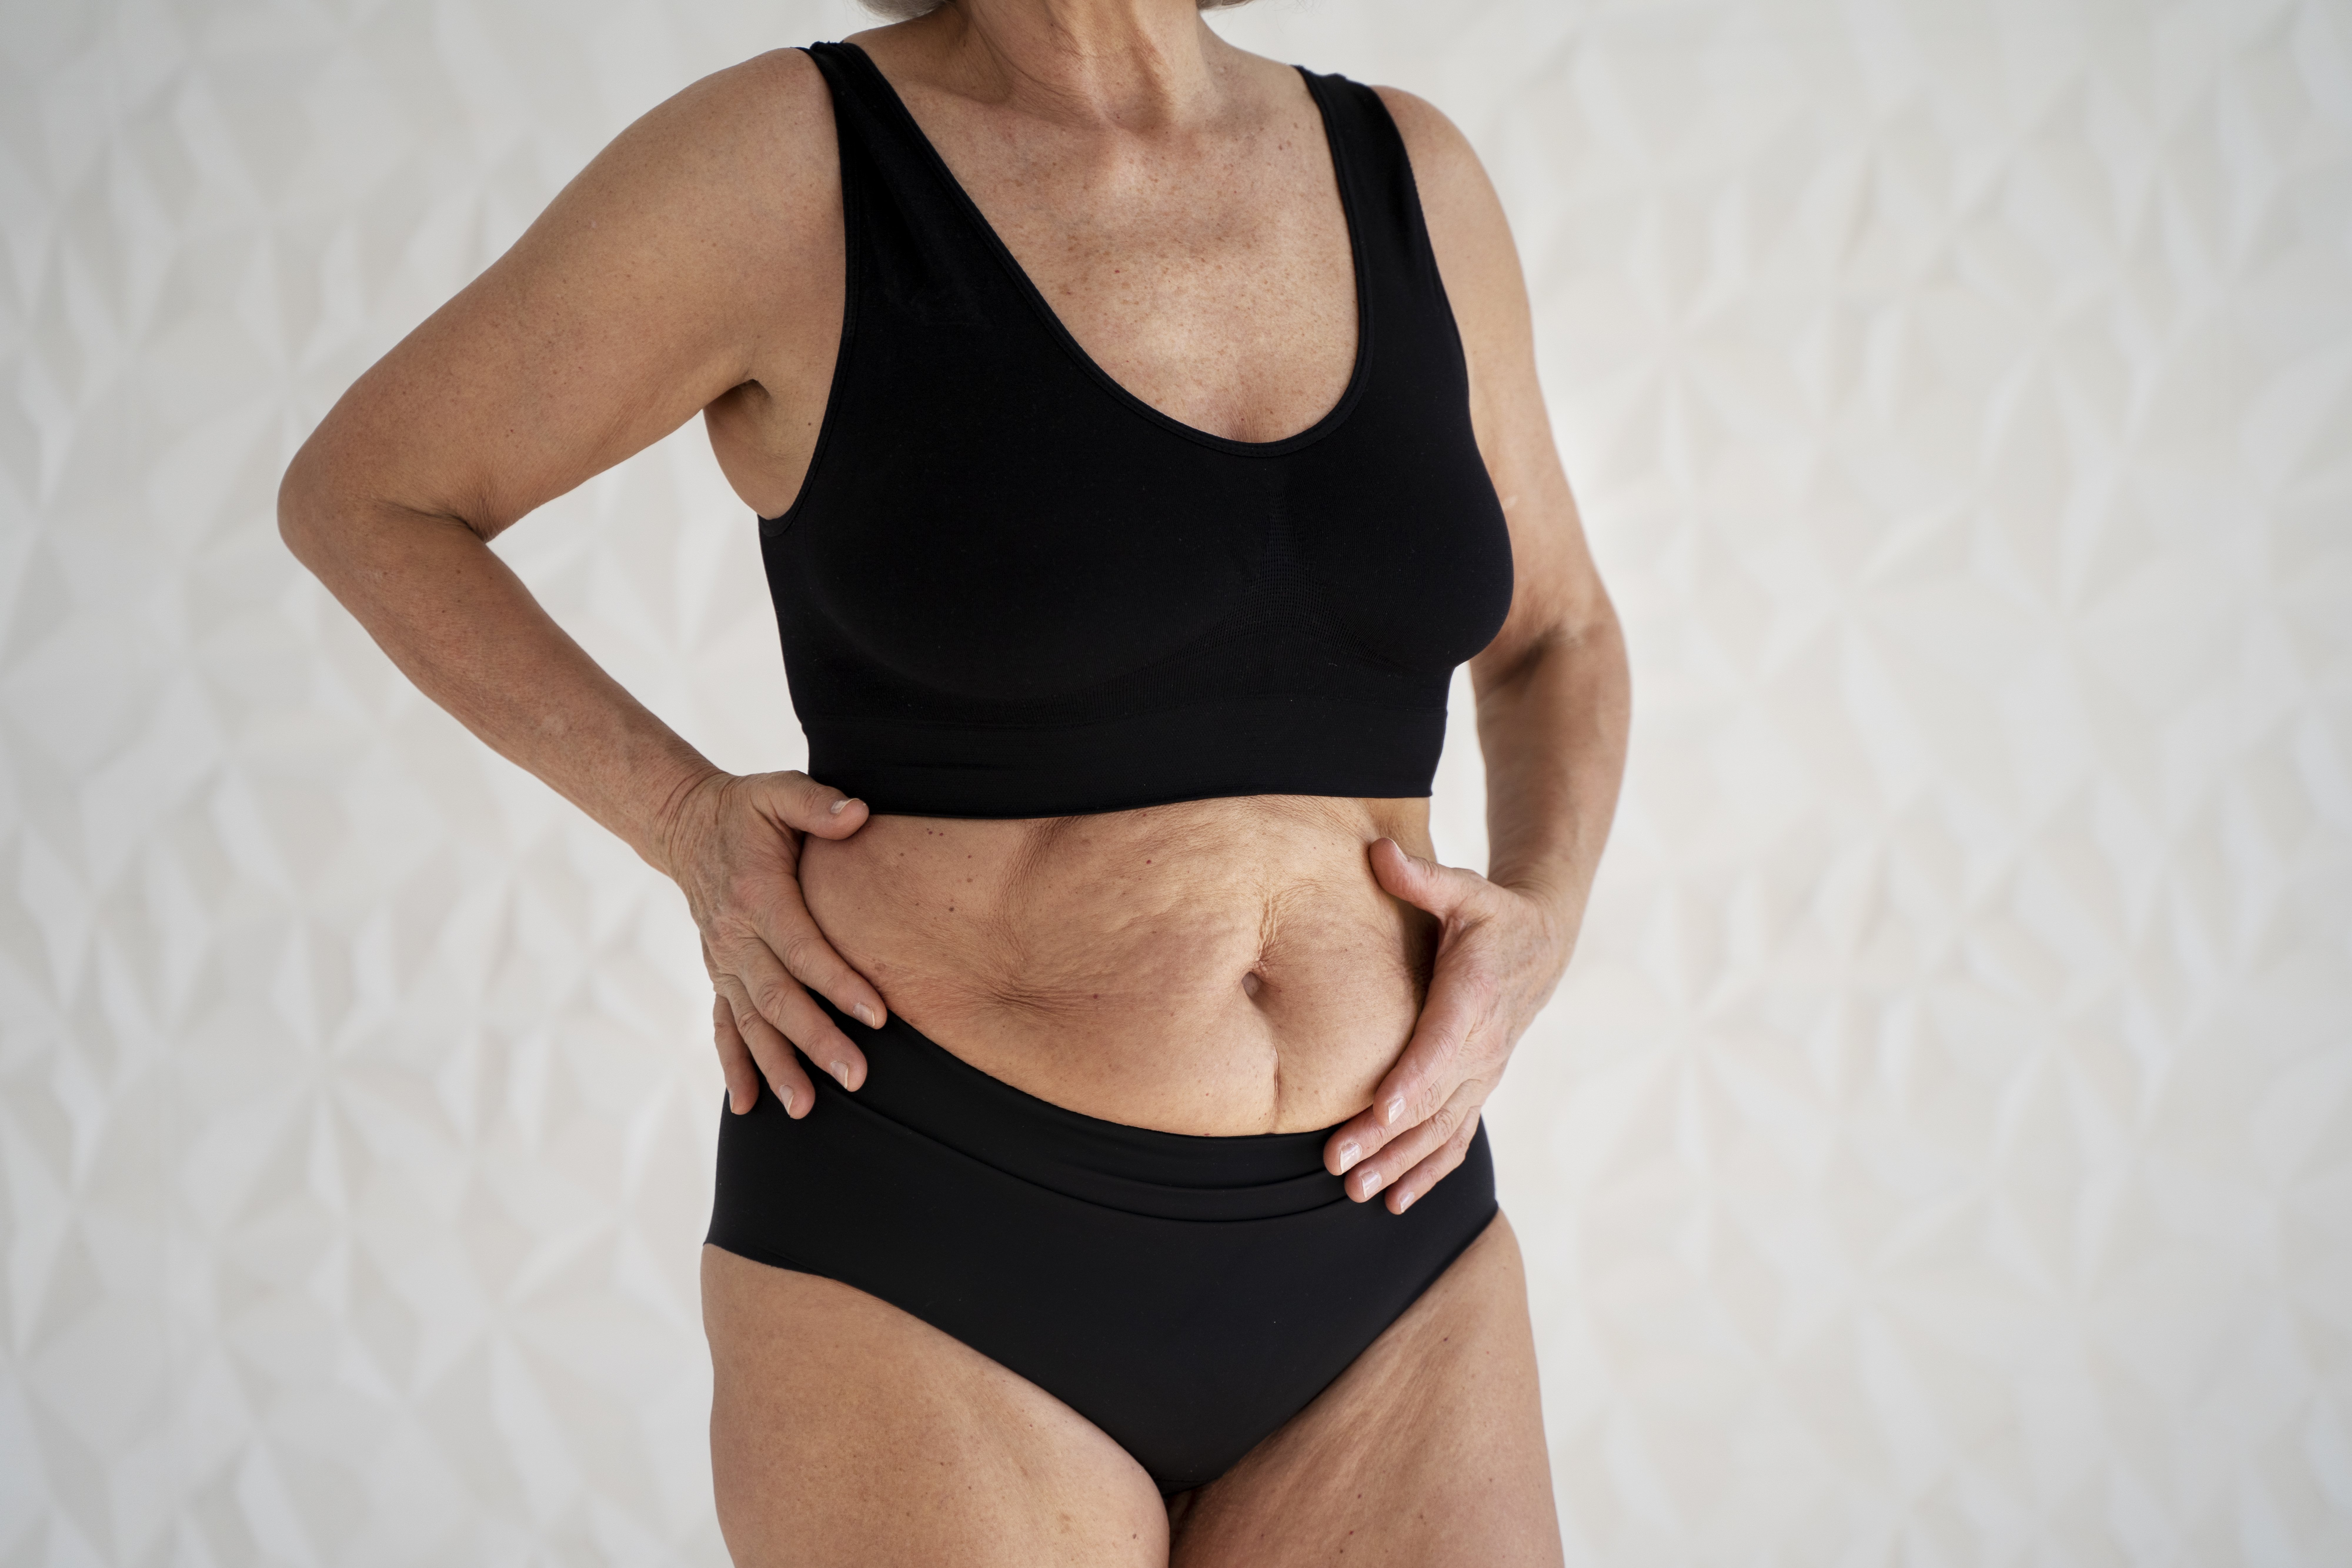 What Are The Features Of Tummy Tuck?